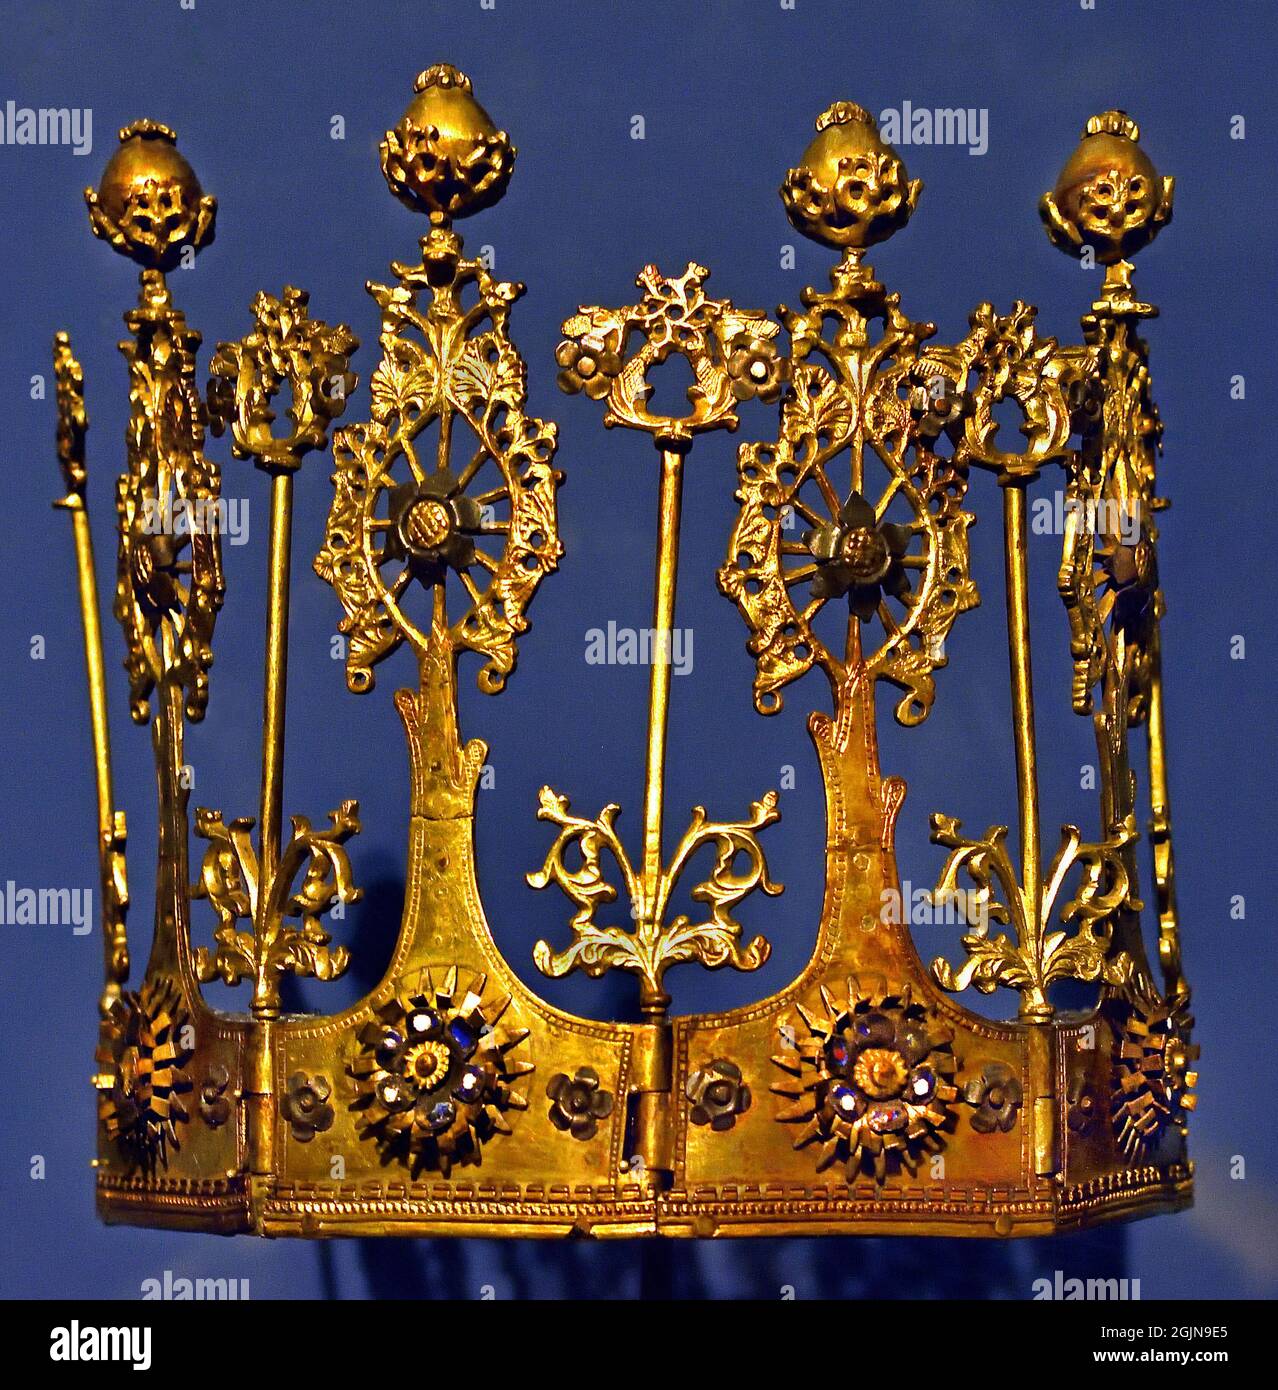 The Crown 15th century Museum Hermitage collection (Tsars and Knights, he Romanovs love for Middle ages, ladies, courtly love and tournaments. House of Romanov, Imperial dynasty 1613 - 1917. Russia, Russian Tsars and Knights, The Romanovs love for Middle ages, ladies, courtly love and tournaments. The House of Romanov, Imperial dynasty 1613 - 1917. Russia, Russian.) Stock Photo